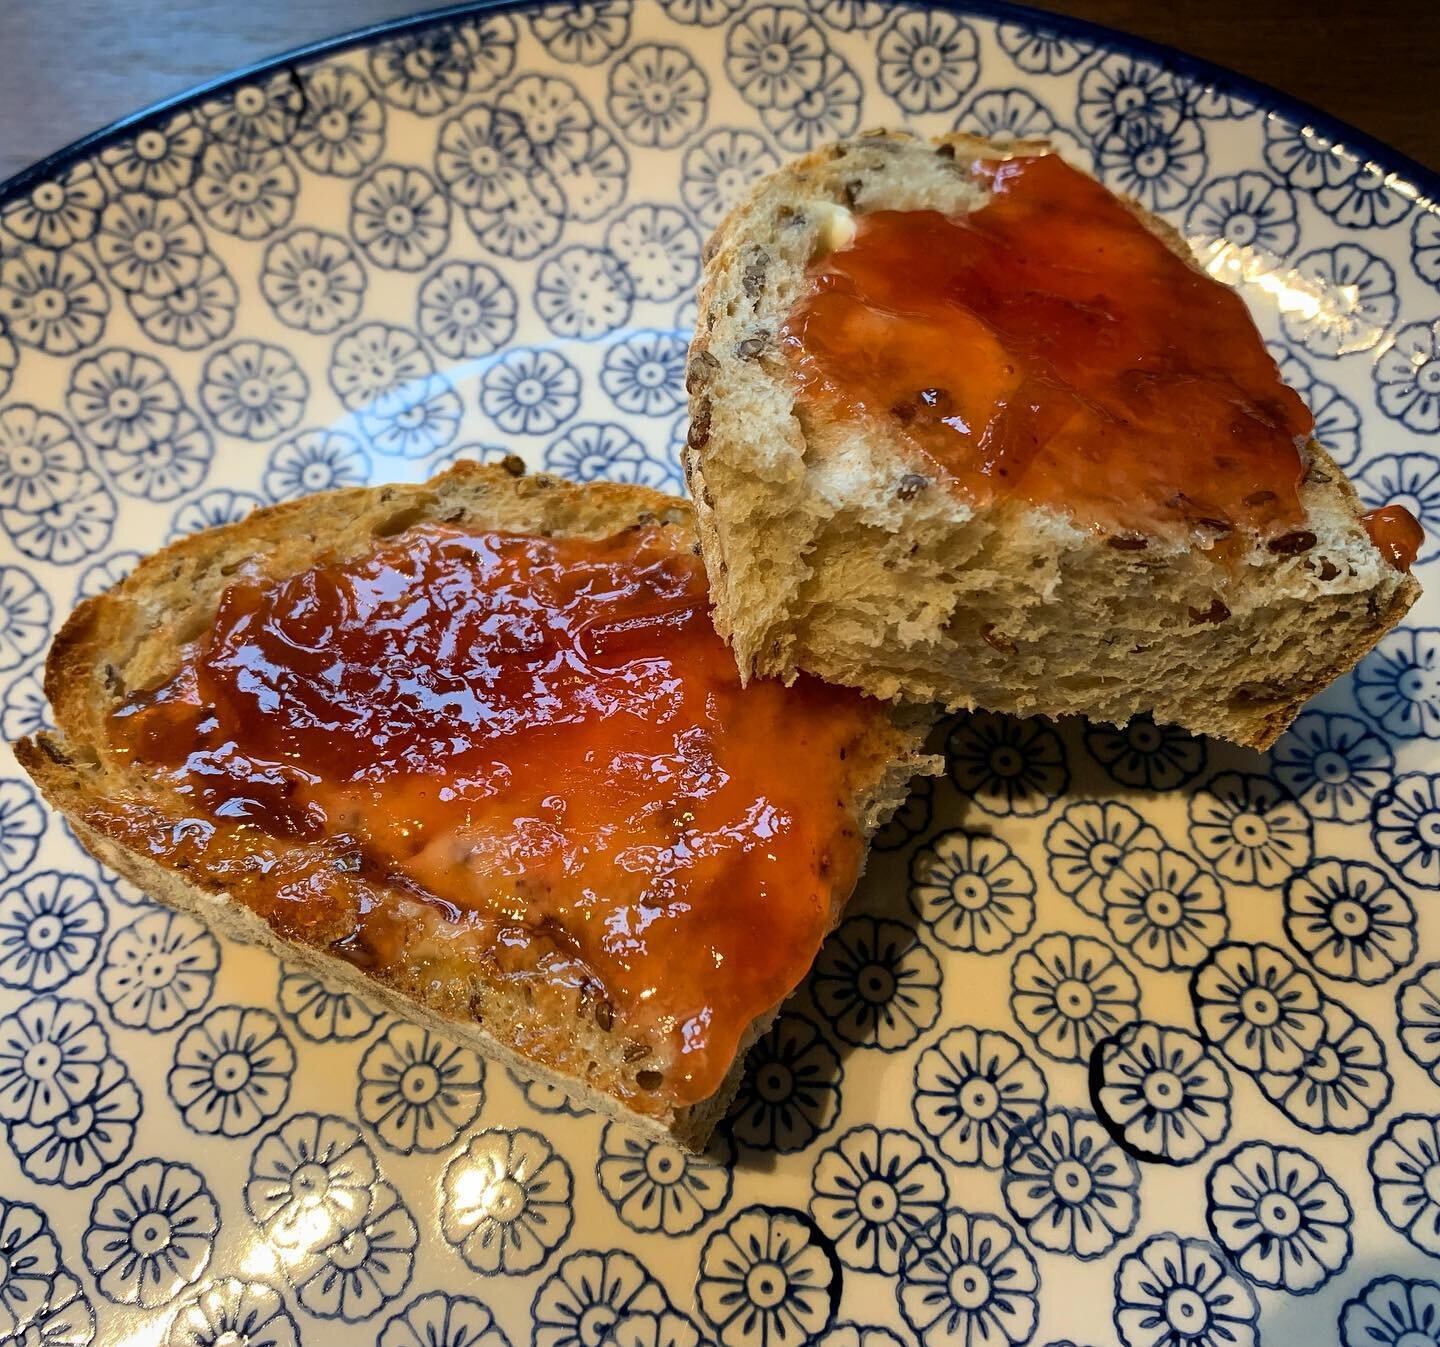 Granny&rsquo;s plum jam on locally baked bread 🍞 with enough butter 🧈 to keep a cardiologist awake at night 🤫 Glampers are based in the plum orchard so often go home with pockets full of Broadway plums #cantbeatit #plumjam #plumharvest #plumorchar